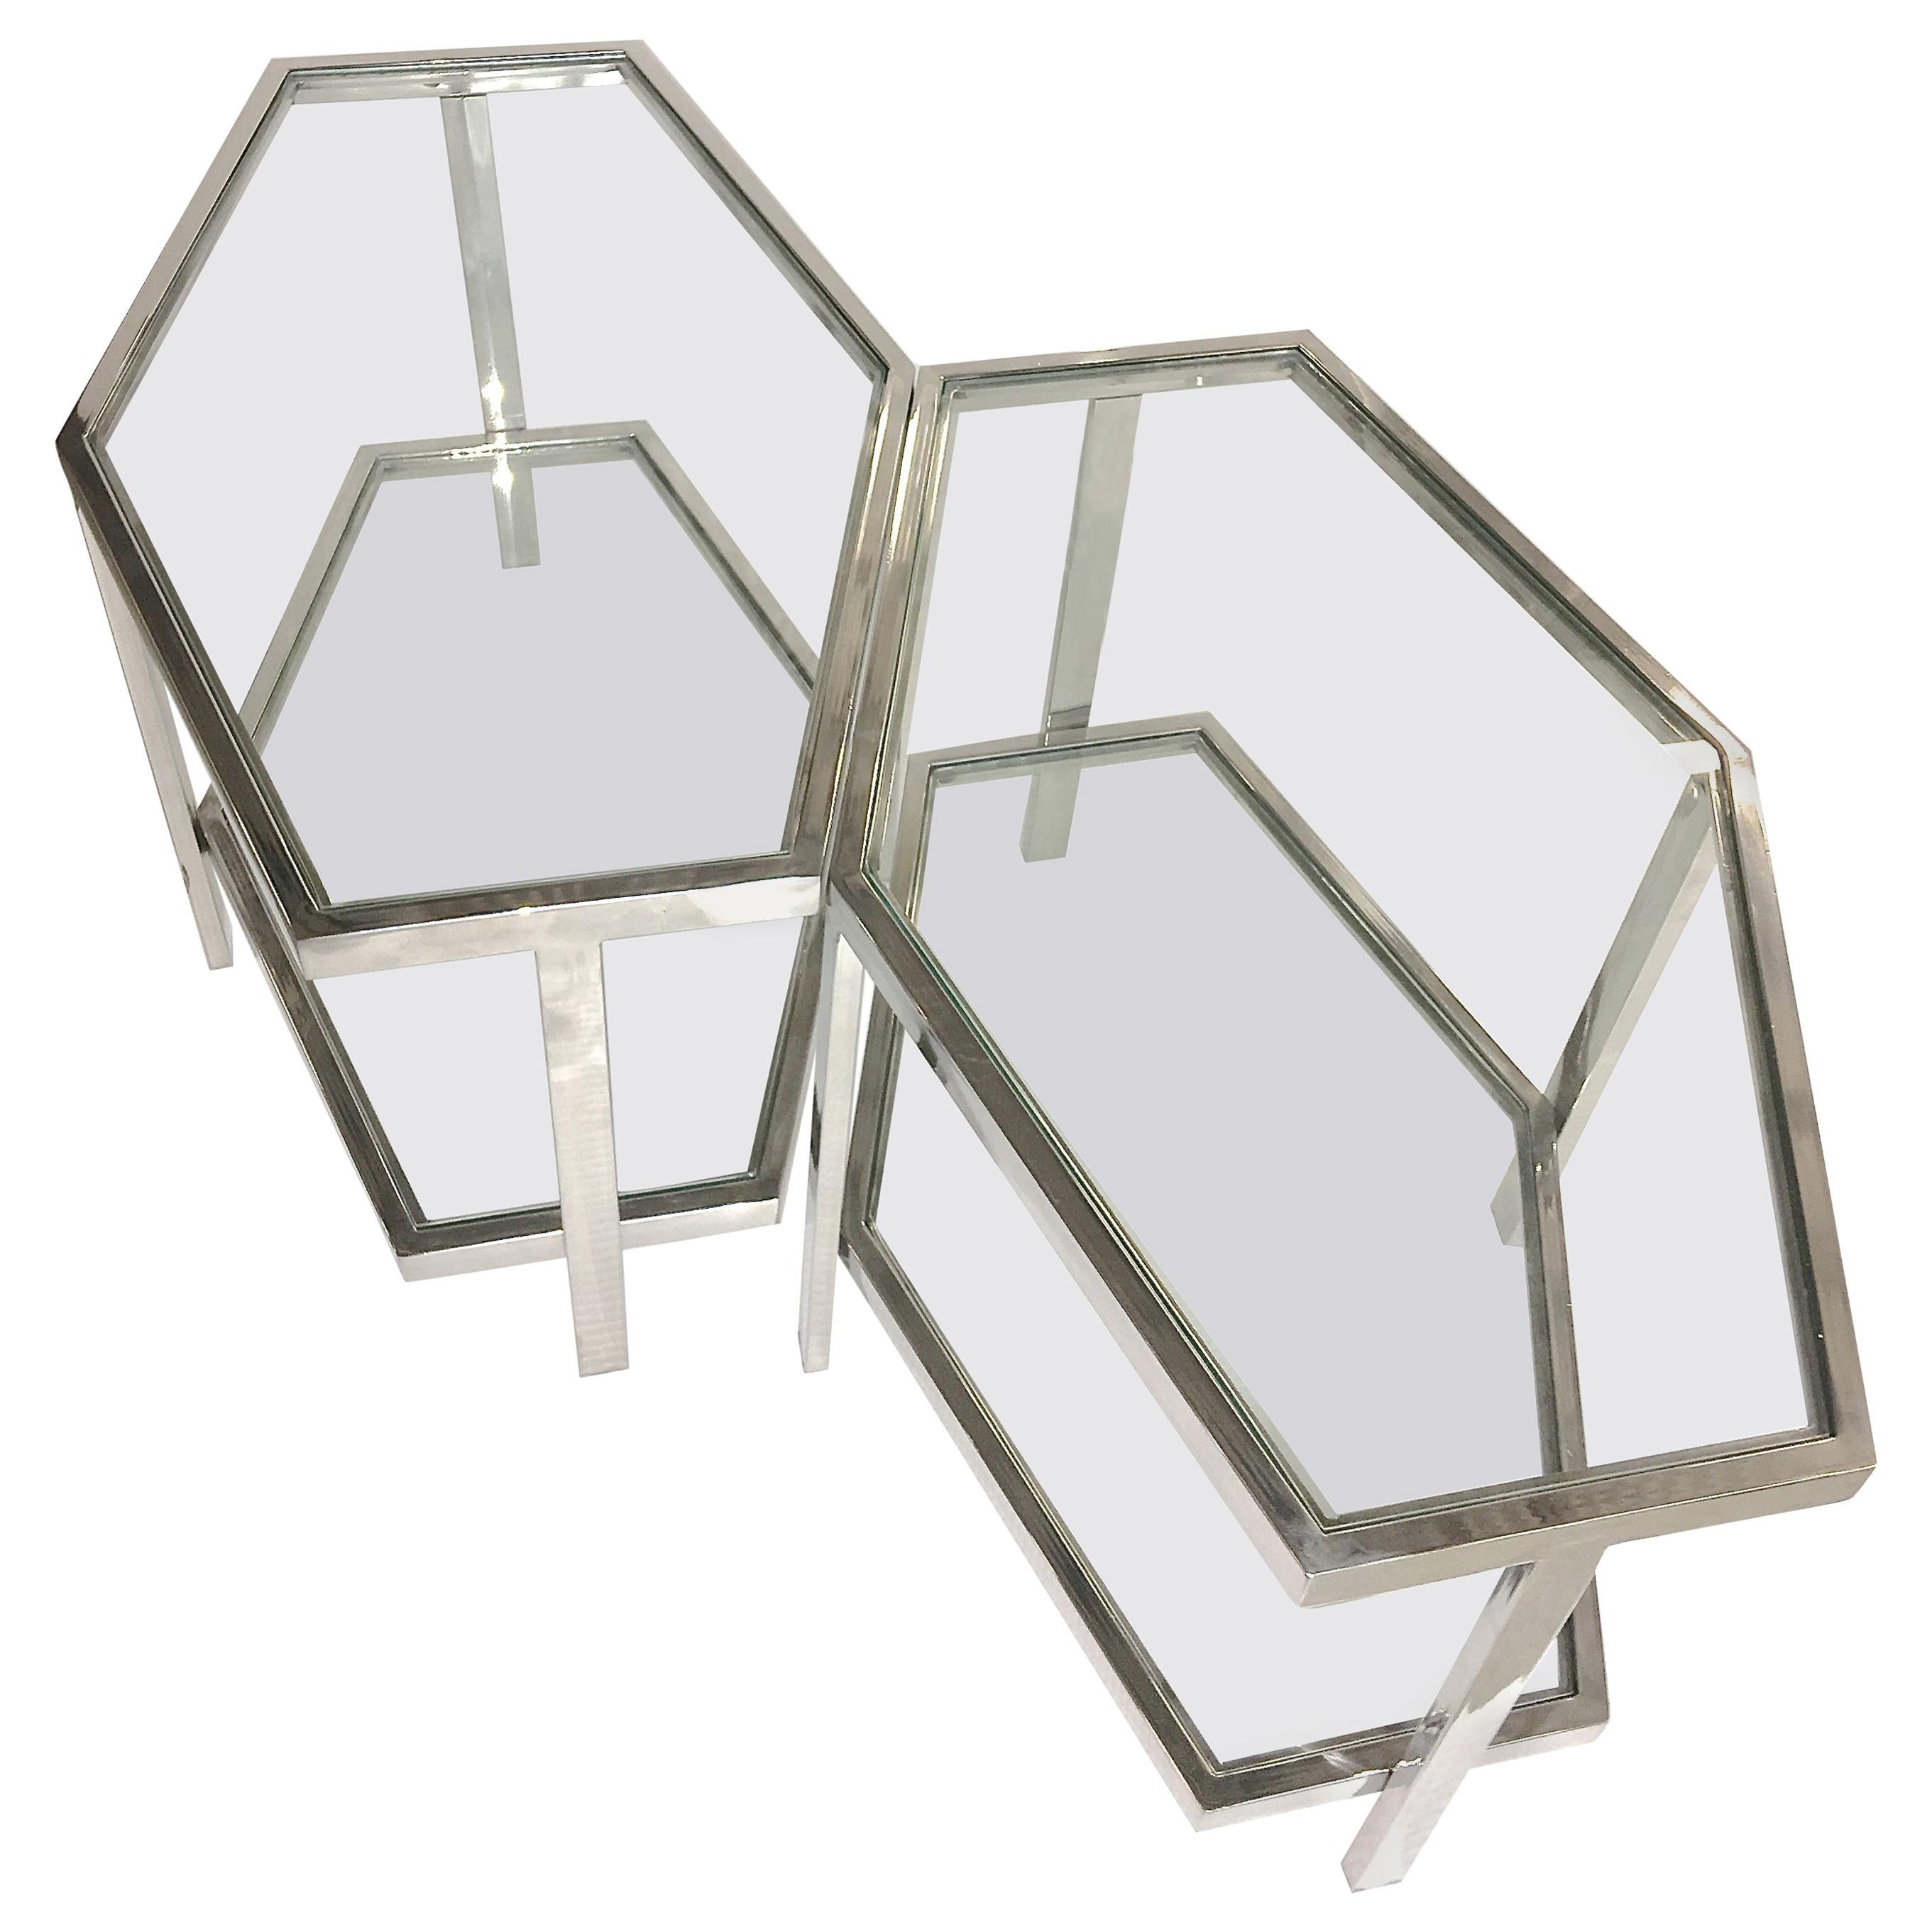 Pair of Chrome and Glass Hexagonal Two-Tier Side Tables